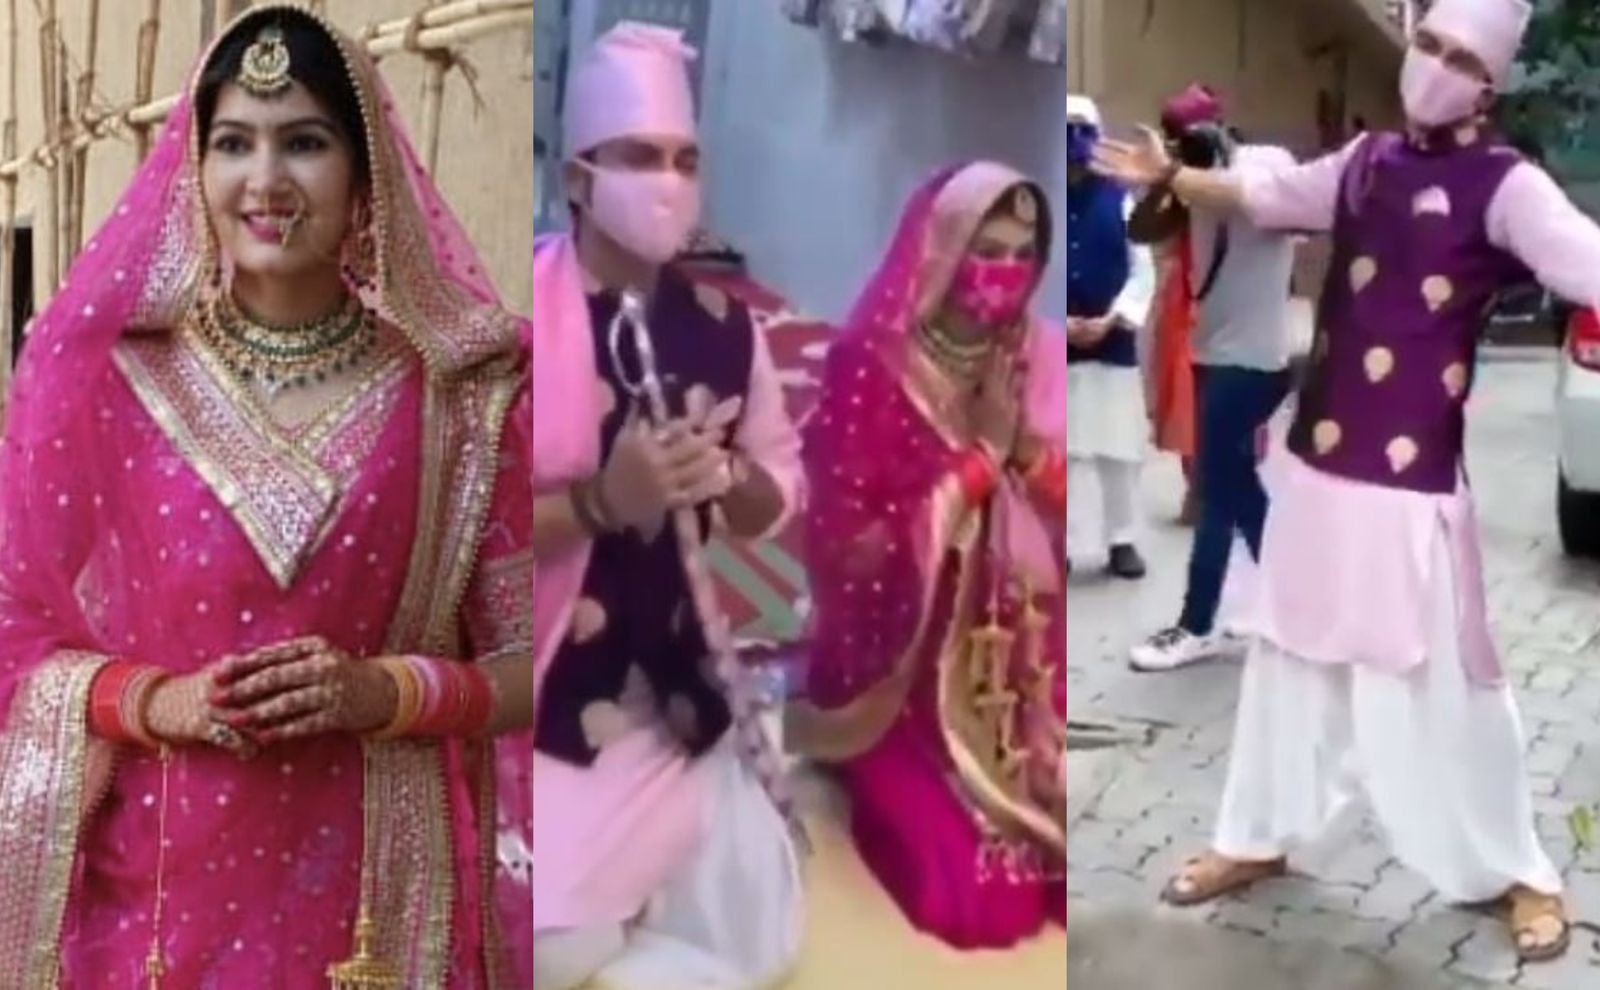 TV Actors Manish Raisinghan And Sangeita Chauhaan Get Married In A Mumbai Gurudwara With No Wedding Party In Tow; See Pics 